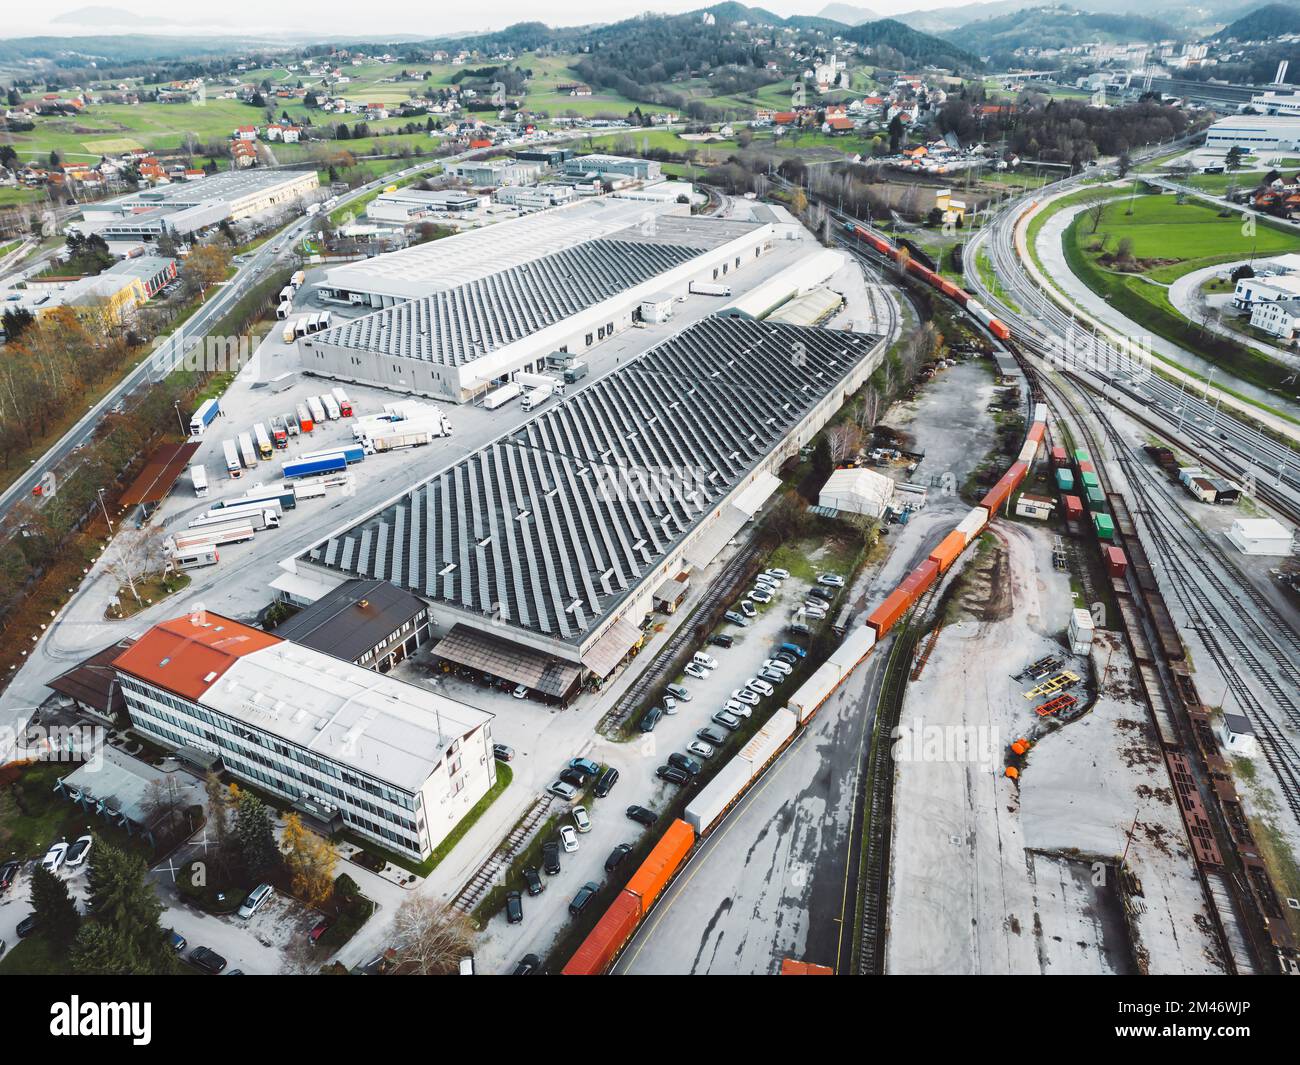 Drone view, industrial area with rooftops of the buildings covered in solar panels  Stock Photo